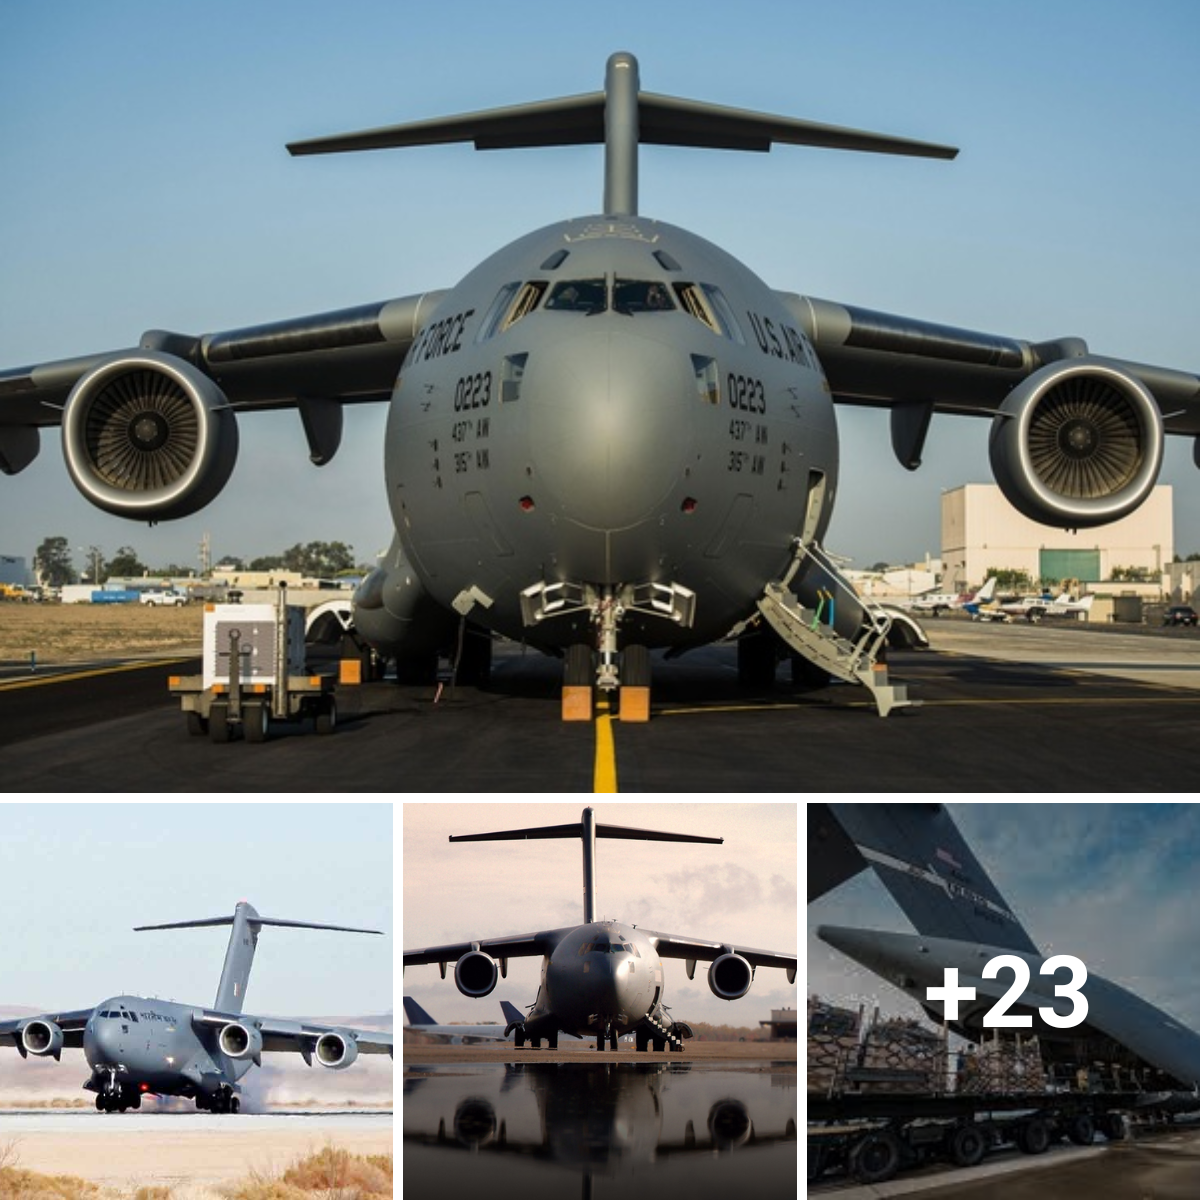 Operating for the US Air Force, the $340 million C-17 aircraft has exceptional parking skills.